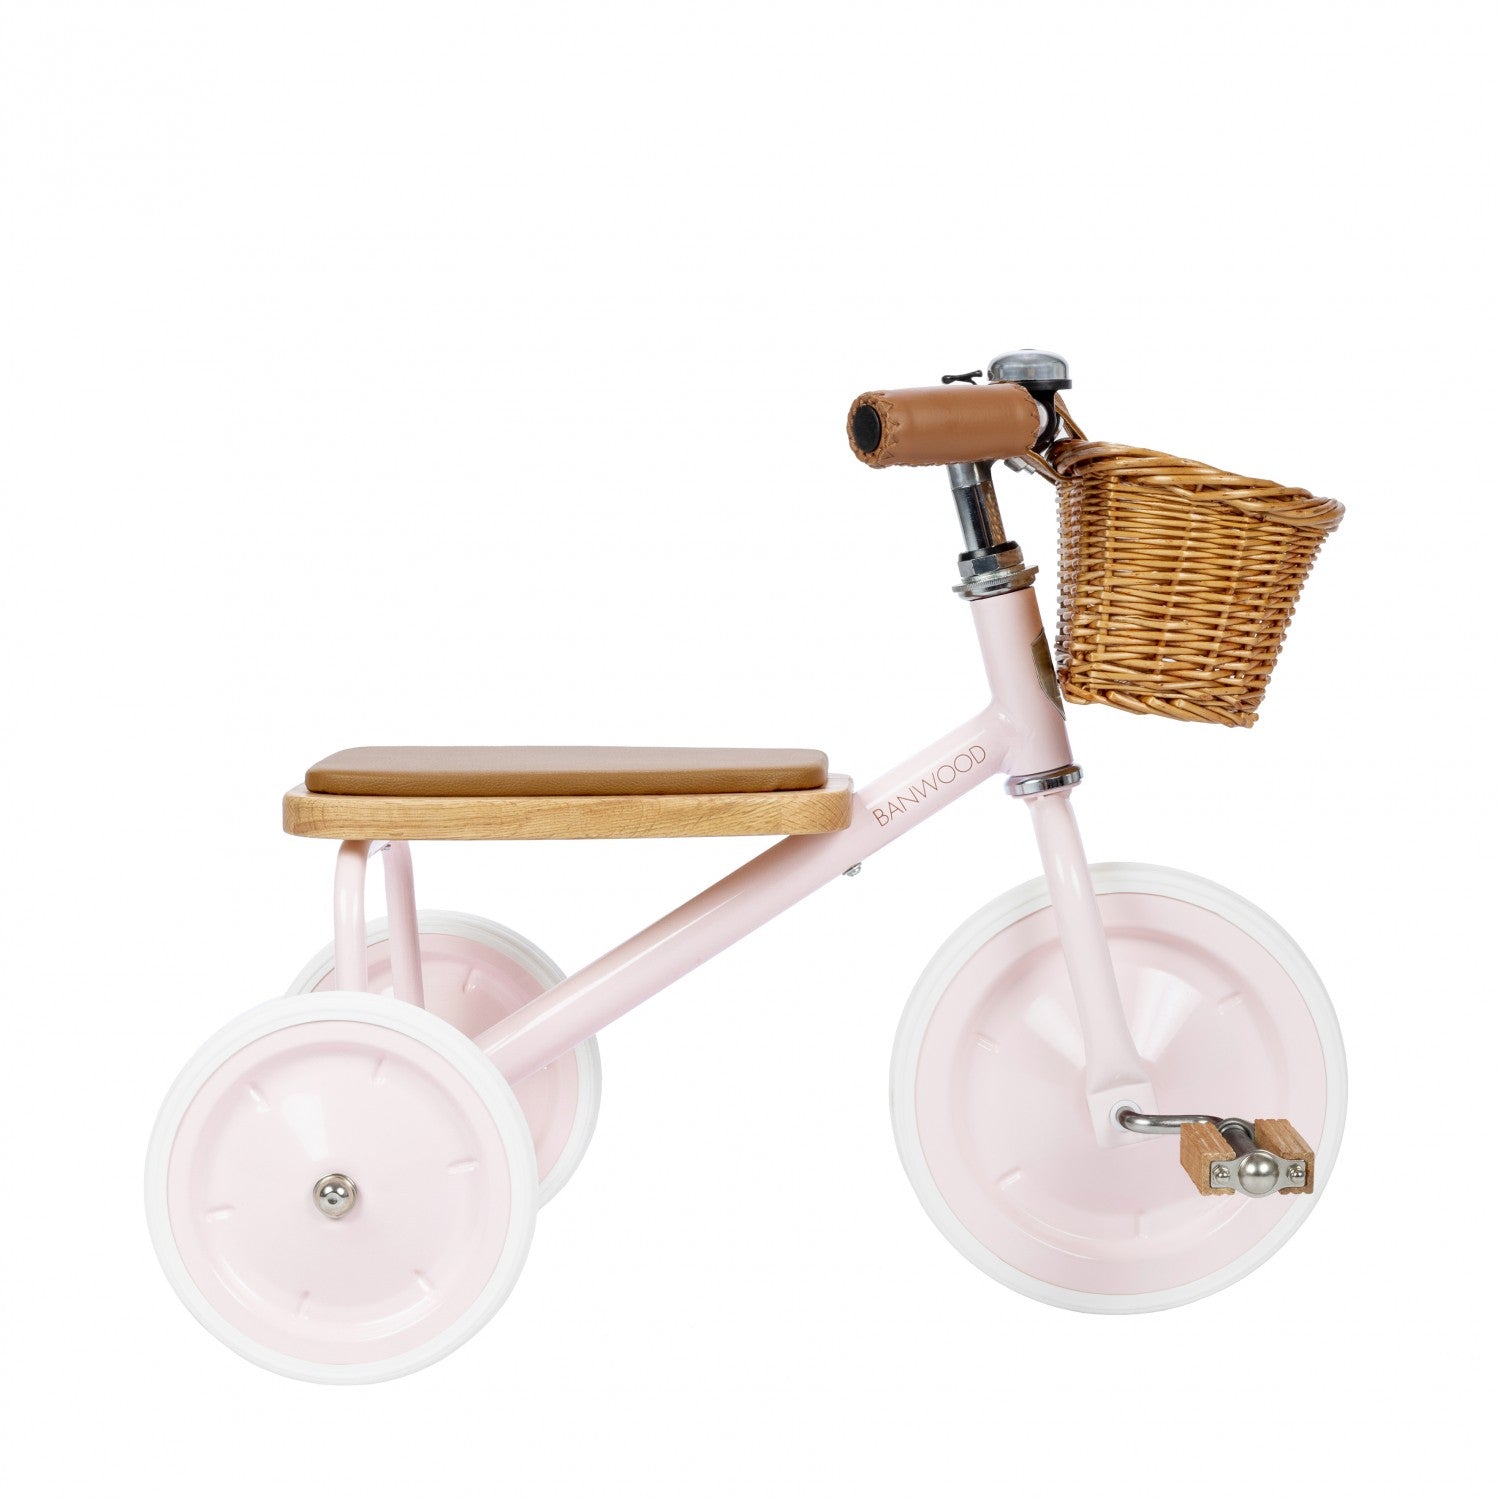 Banwood Bikes Trike - Pink Tricycle with wicker basketBanwood Bikes Light Pink Trike with Wicker Basket